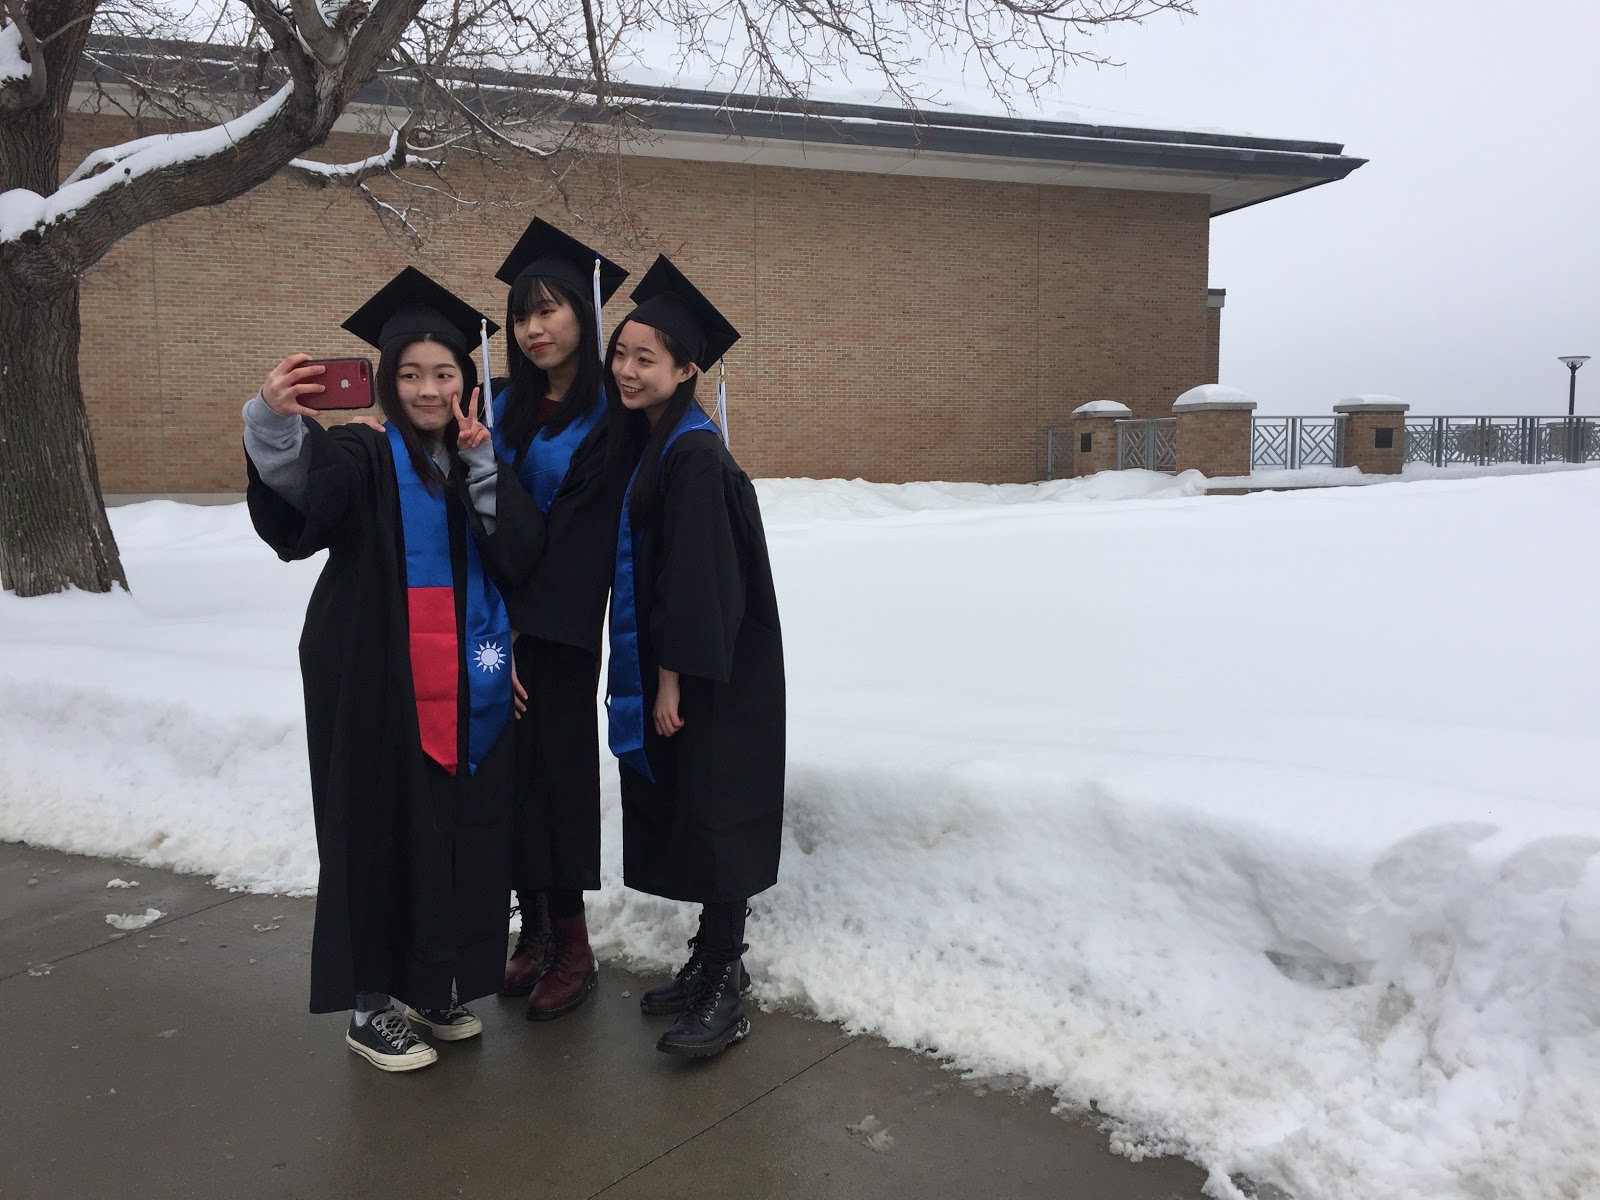 Ya-Hsin Hsueh, left, Chin-Yu Yu and Huei-Cin Chen take selfies in their caps and gowns outside New Main on the St. Paul campus on Saturday, Feb. 23, 2019. The three business administration majors graduate at the end of spring semester and will walk in the commencement exercises at the Minneapolis Convention Center on April 27. They attended the Grad Expo in the Great Hall to purchase their regalia.   (Photo by Margot M. Barry / The Metropolitan)